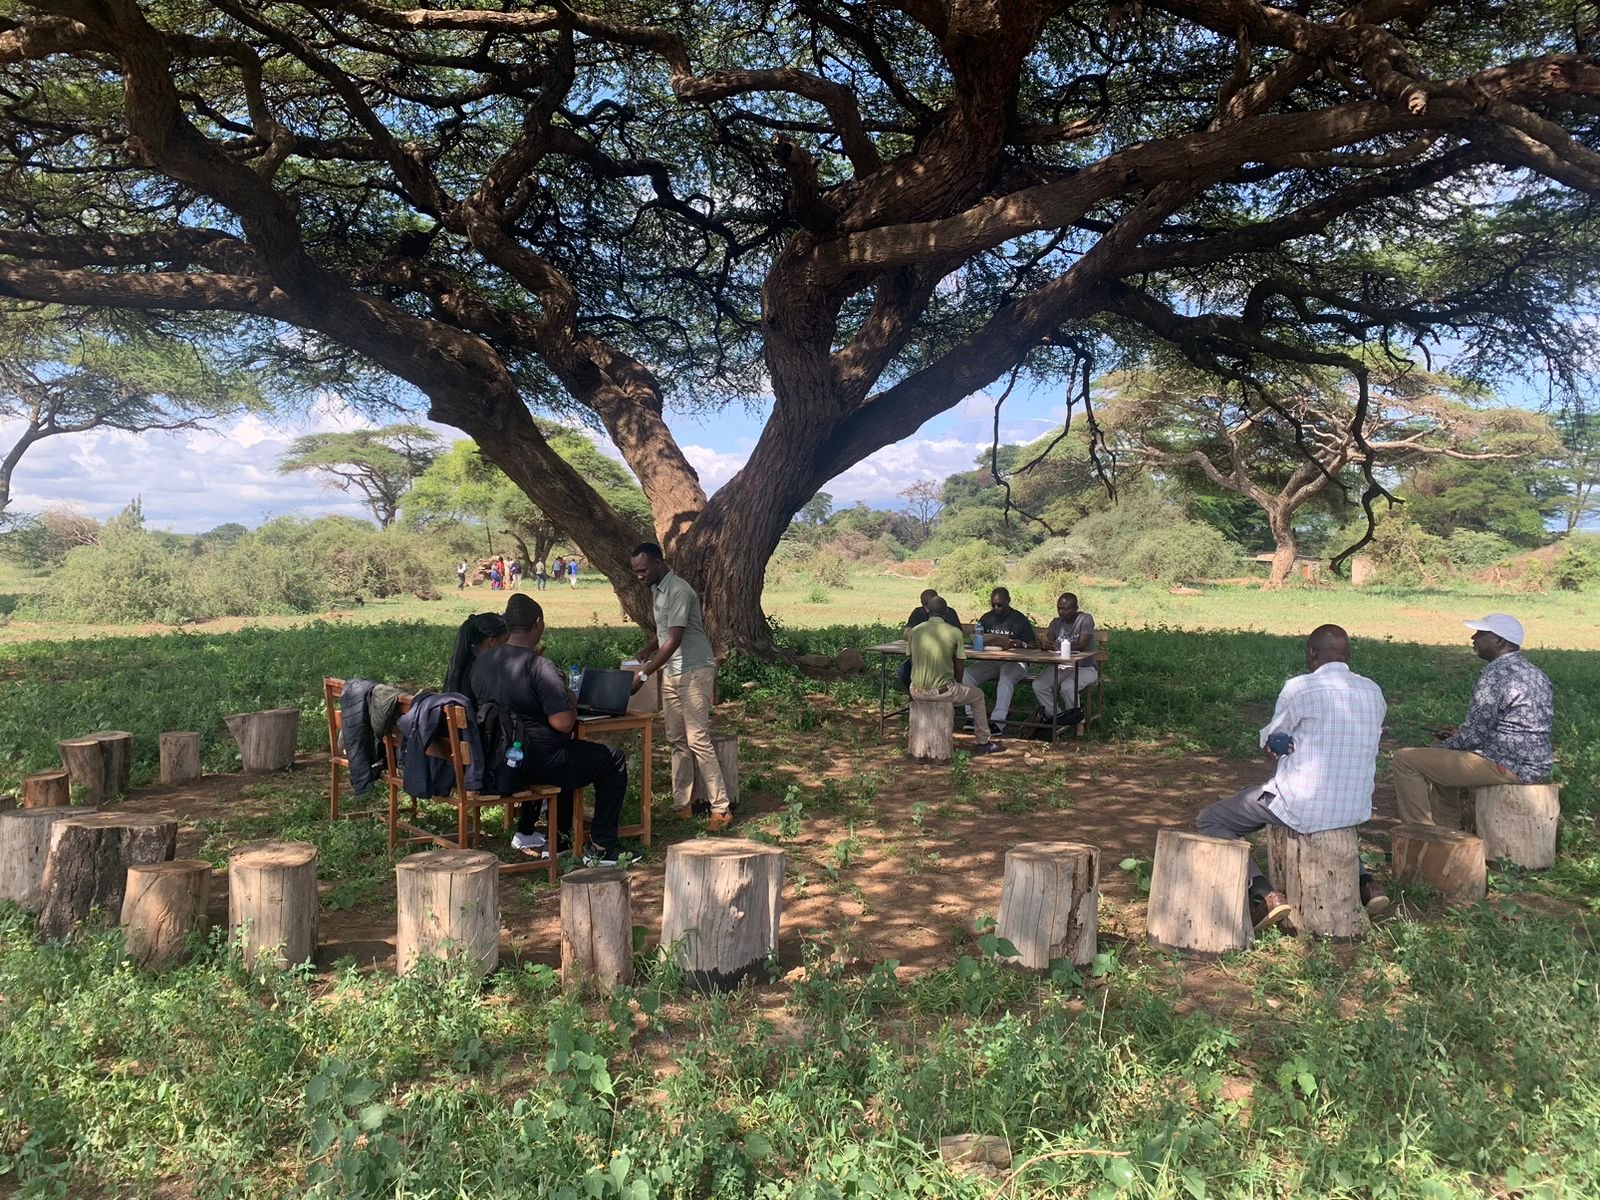 In Maasai culture, many important discussions happen under a big tree like this  